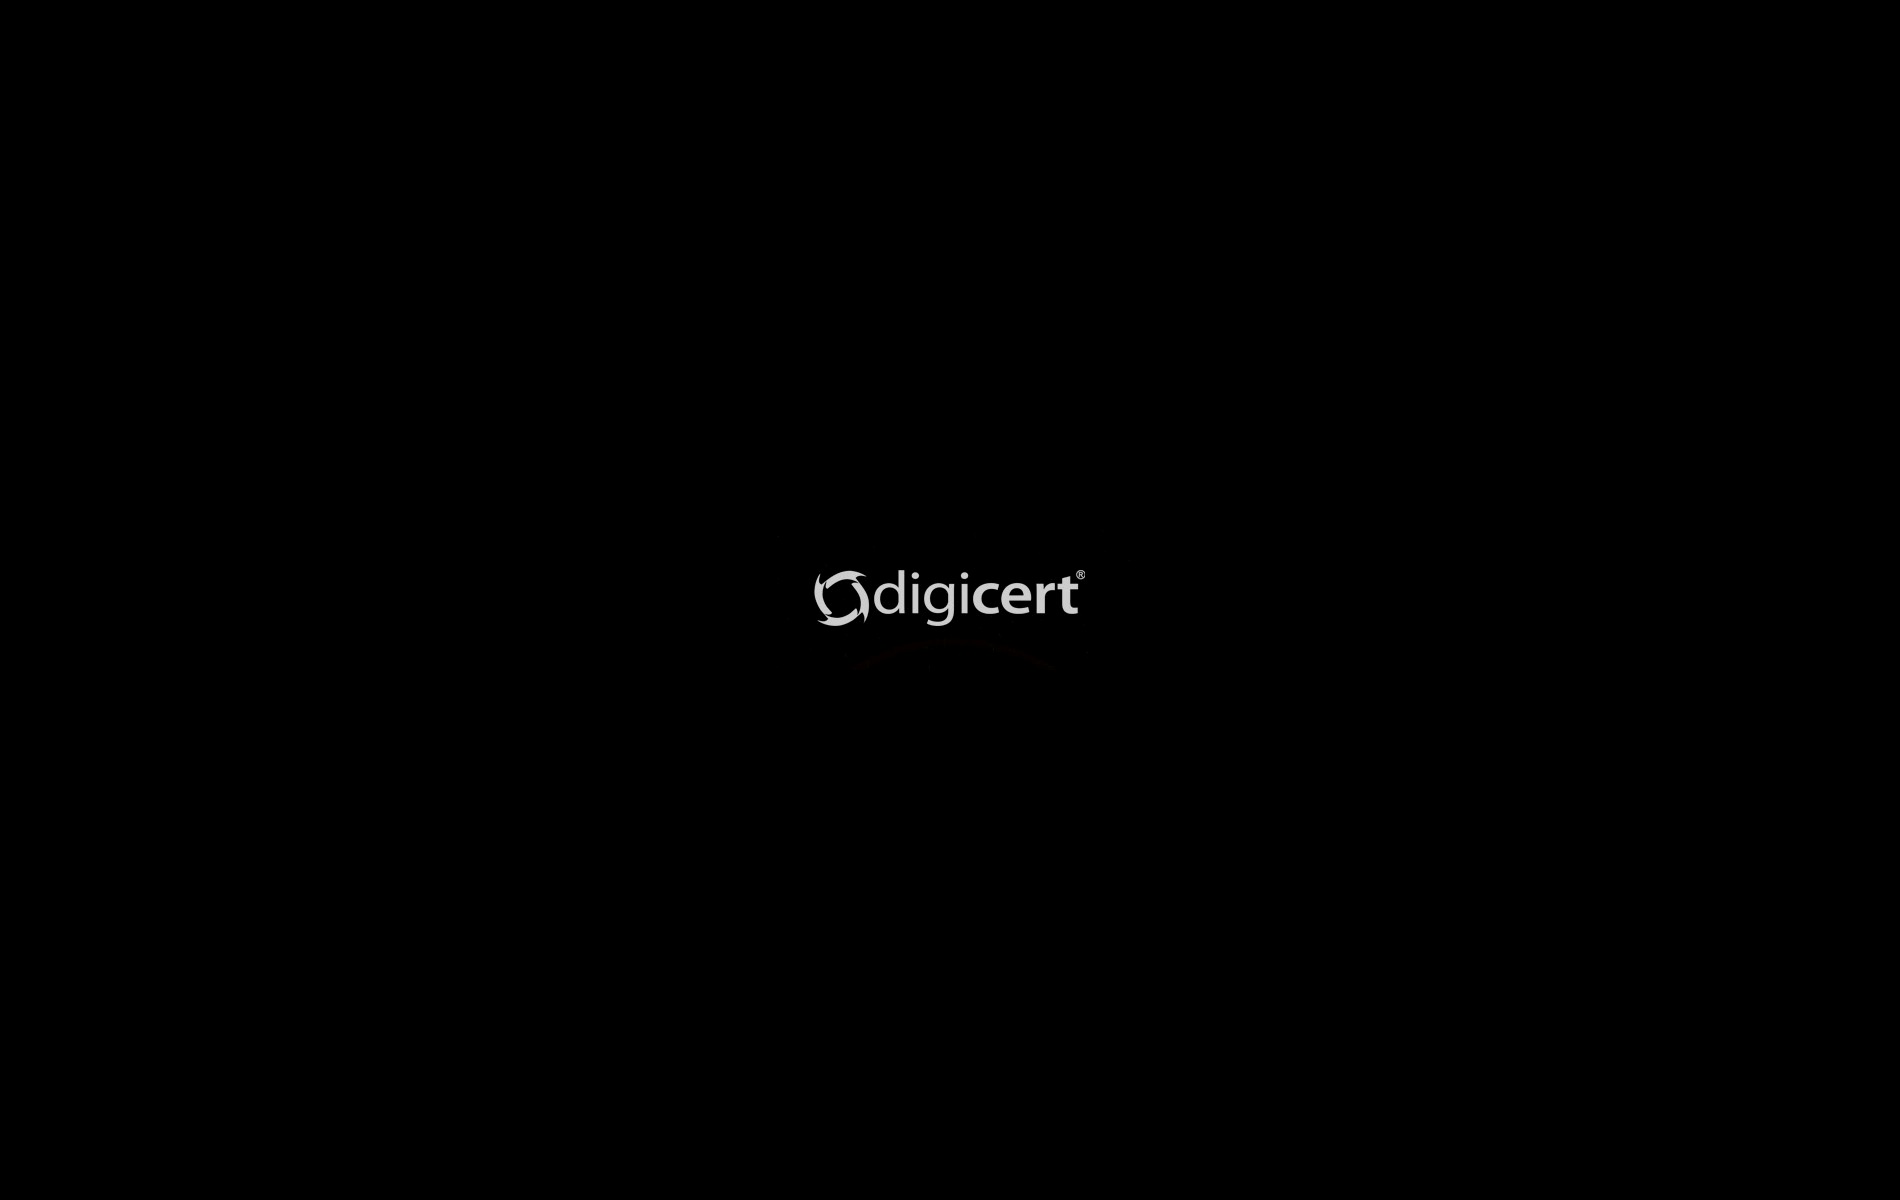 Digicert Wallpaper Background And Other Graphics